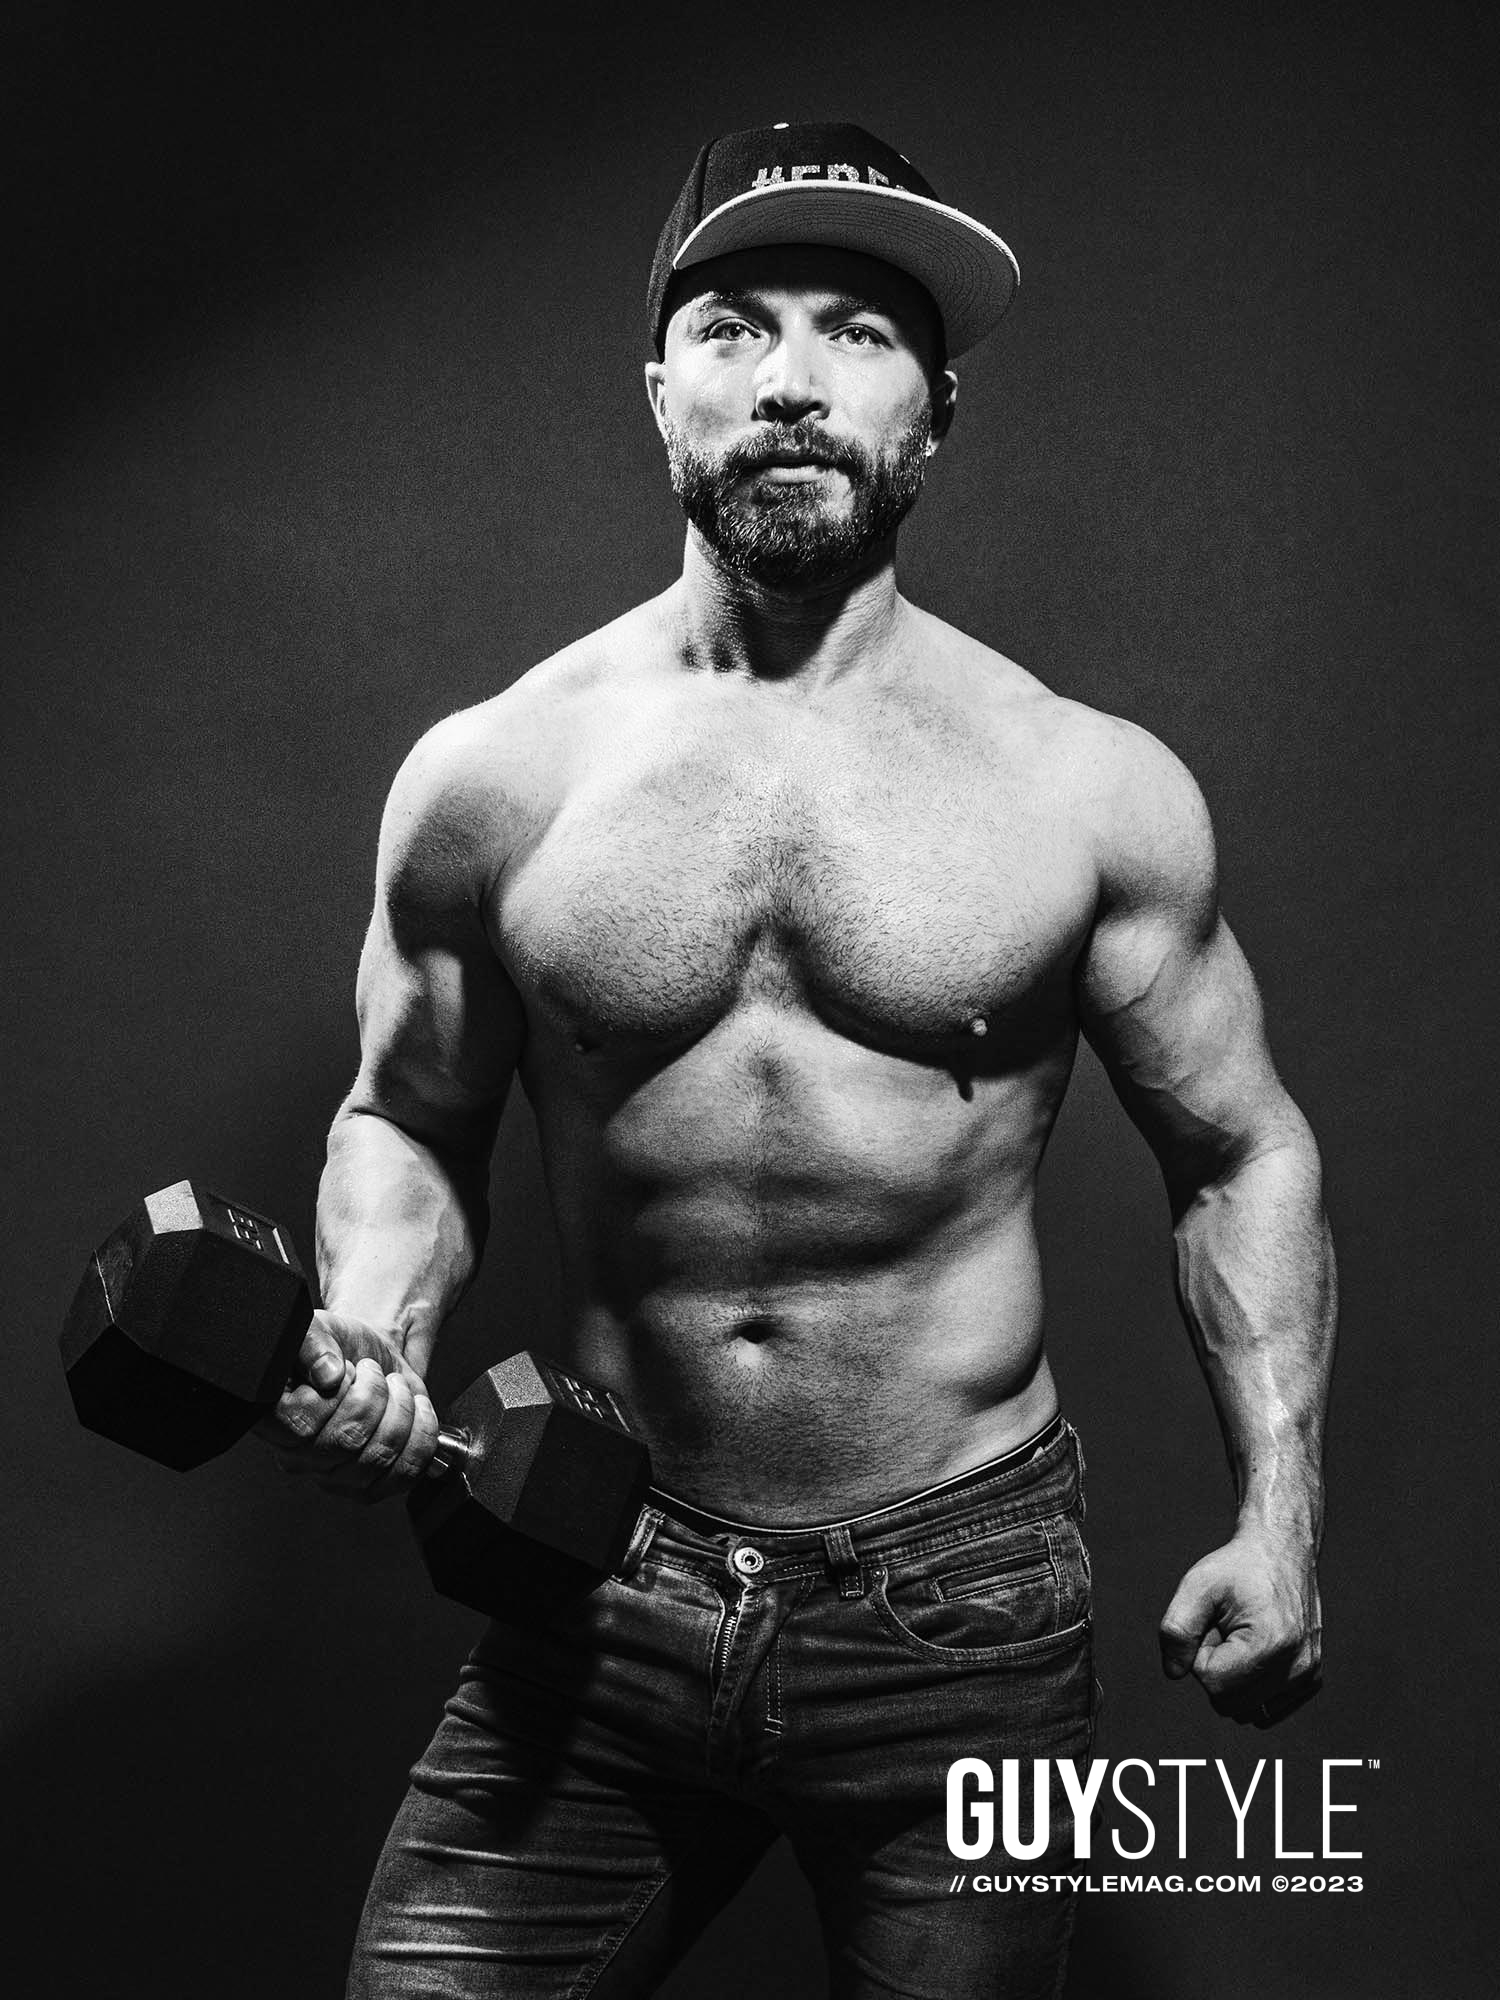 The Power of Pride: How Sexuality Inspires Fitness and Bodybuilding in the Gay Community